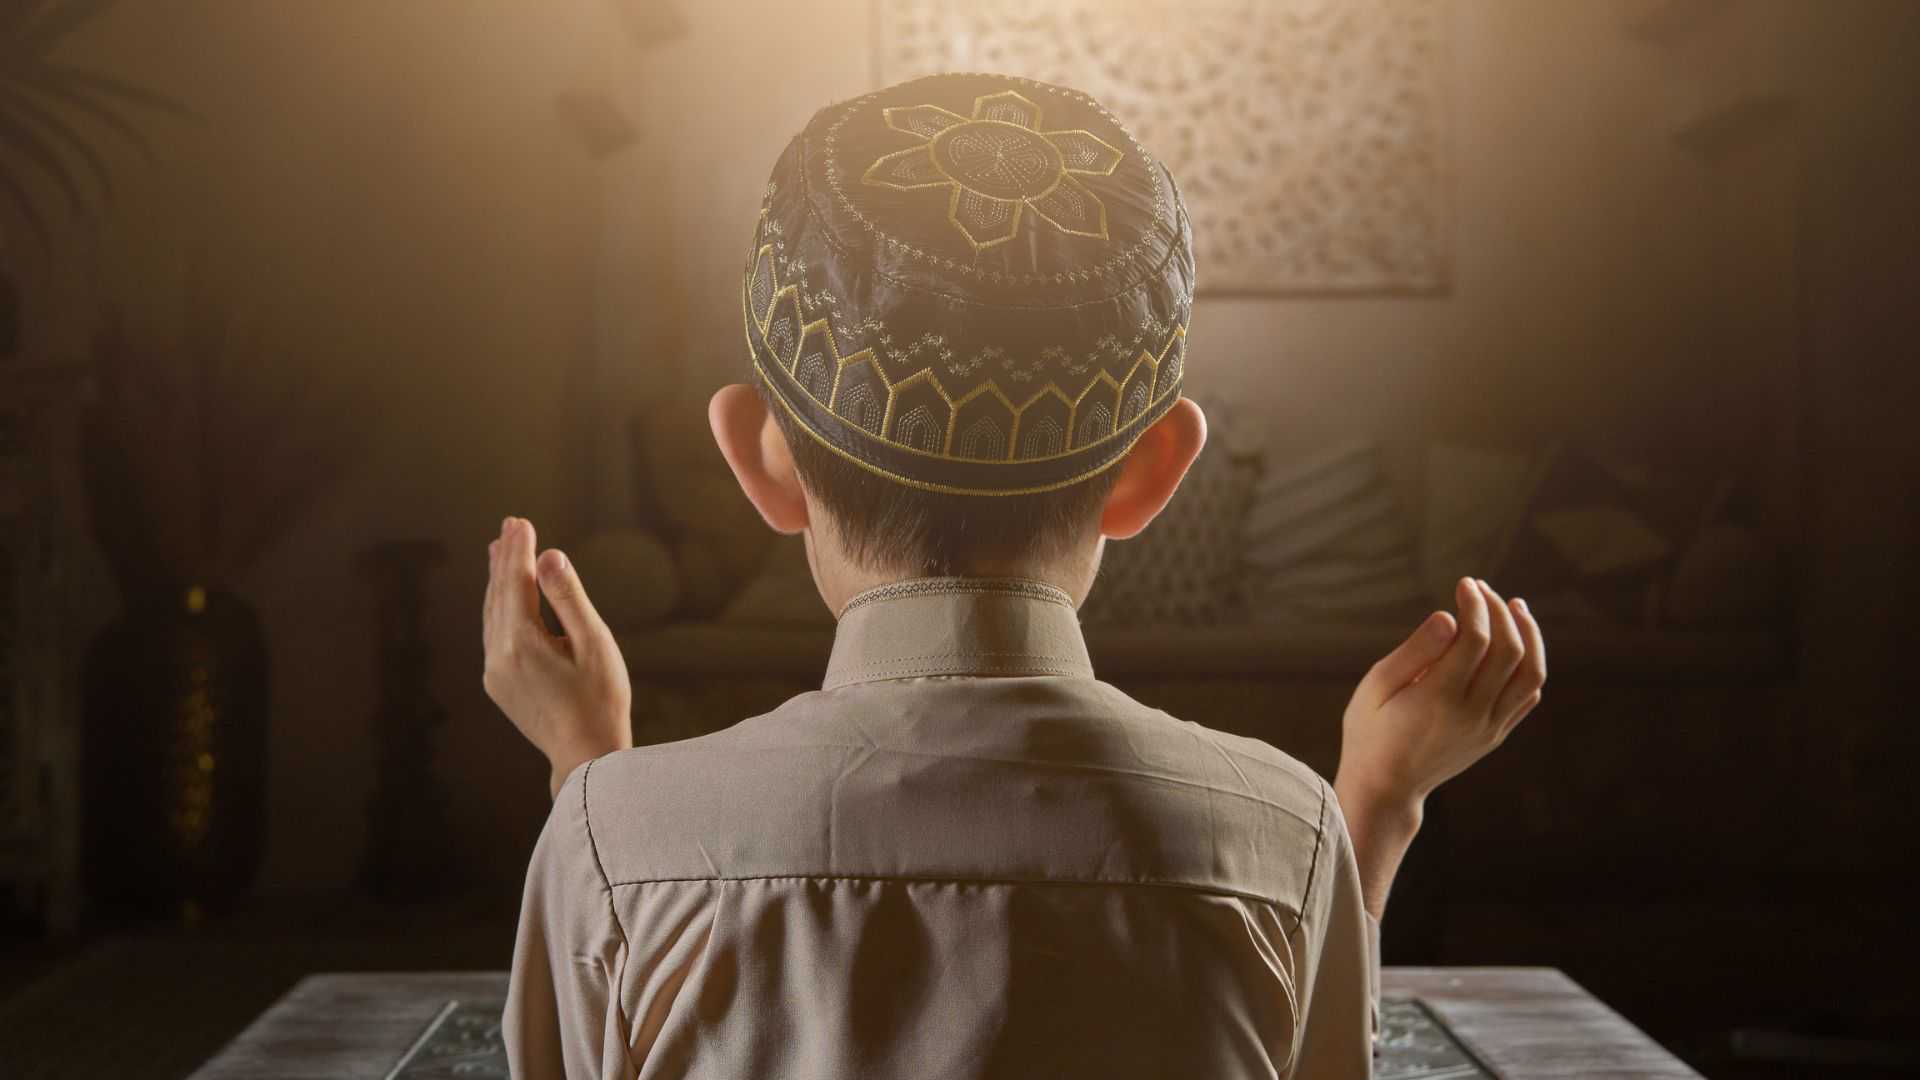 how to get closer to allah